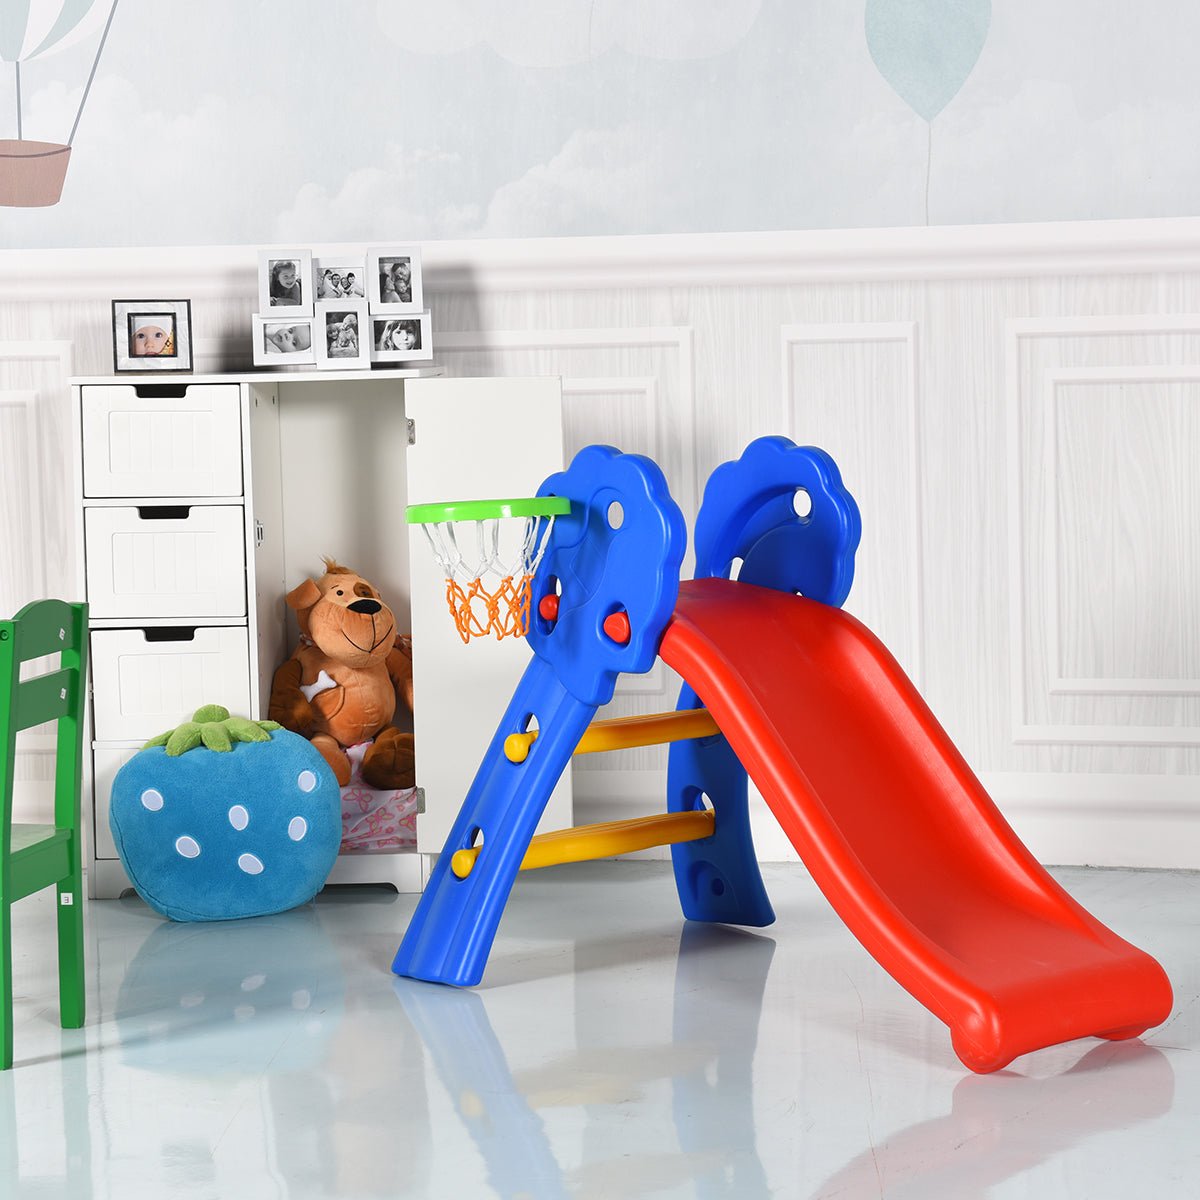 Discover Playtime Excitement with the Folding Slide and Hoop